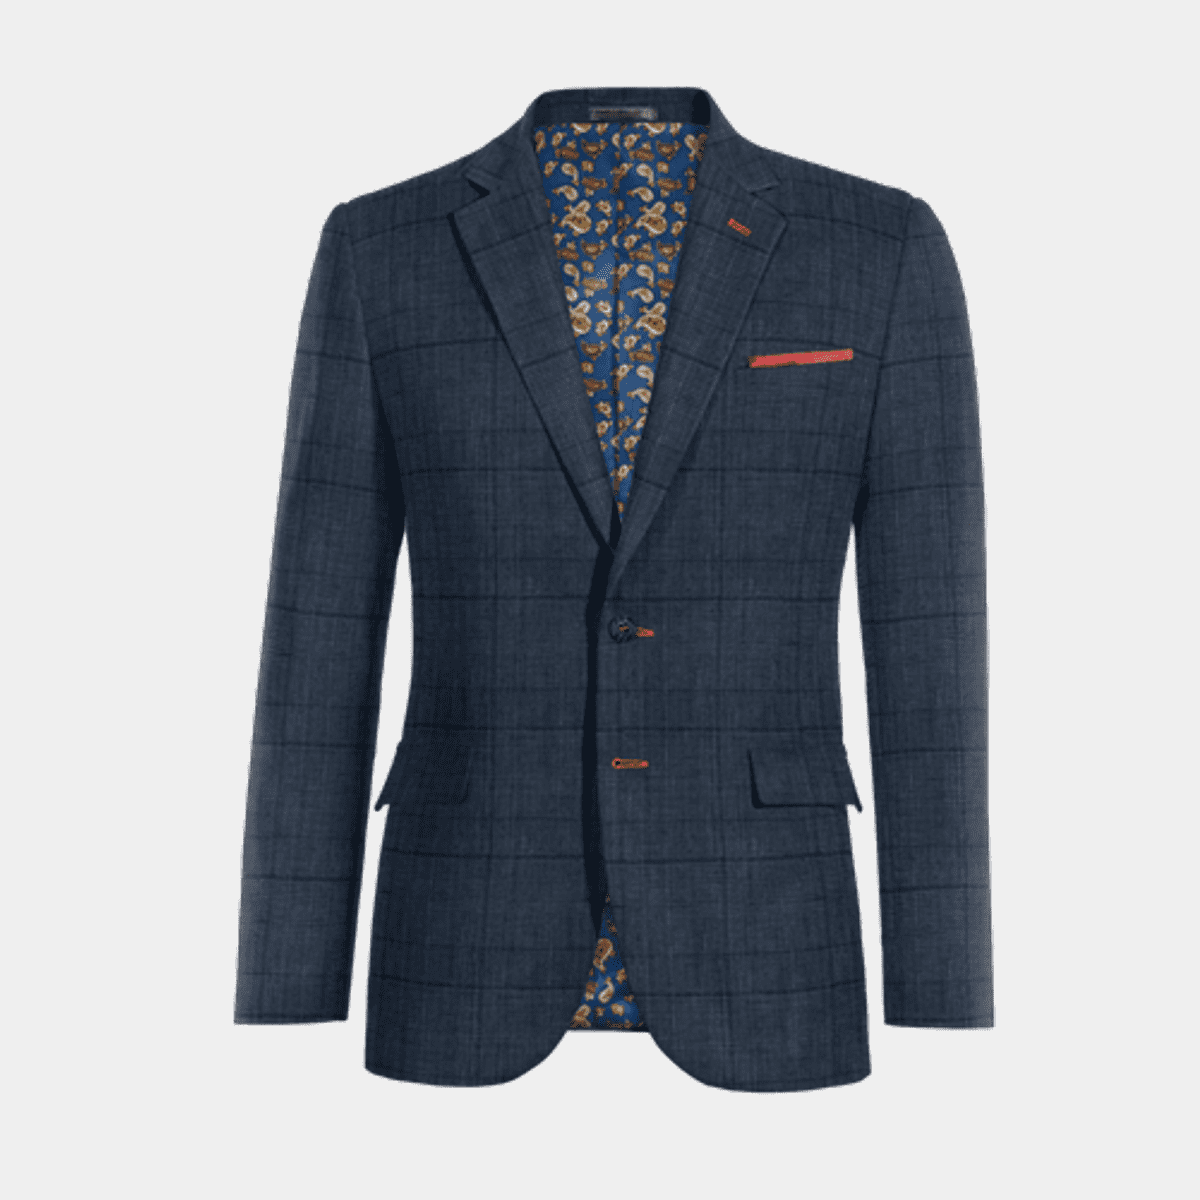 Blue prince of wales lightweight linen Suit Jacket with pocket square